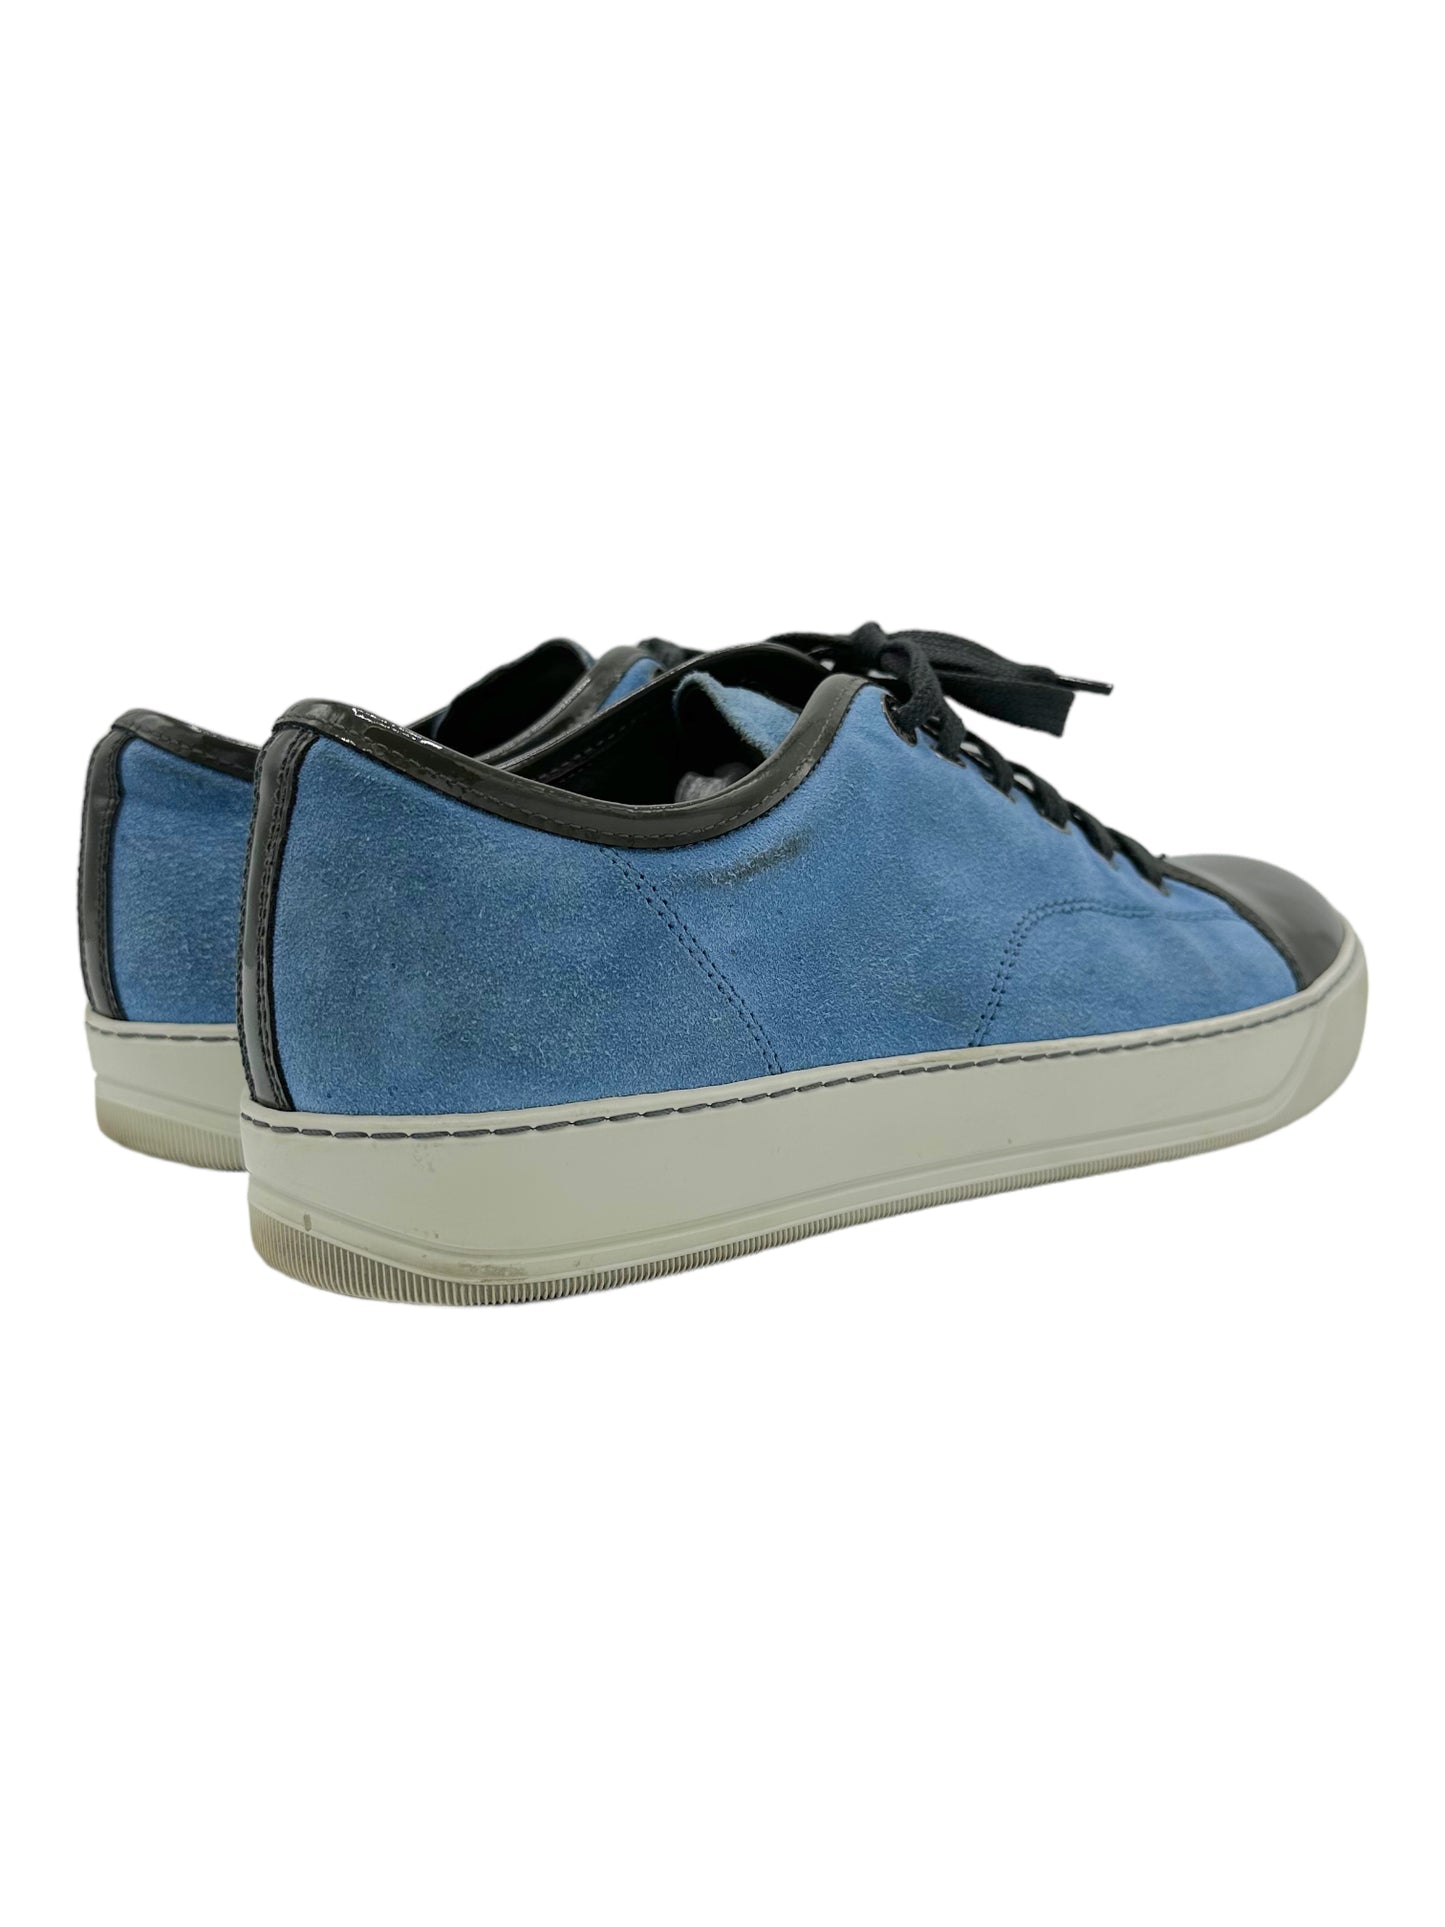 Lanvin Olive and Blue DBB1 Suede and Patent Leather Sneaker - Genuine Design Luxury Consignment for Men. New & Pre-Owned Clothing, Shoes, & Accessories. Calgary, Canada